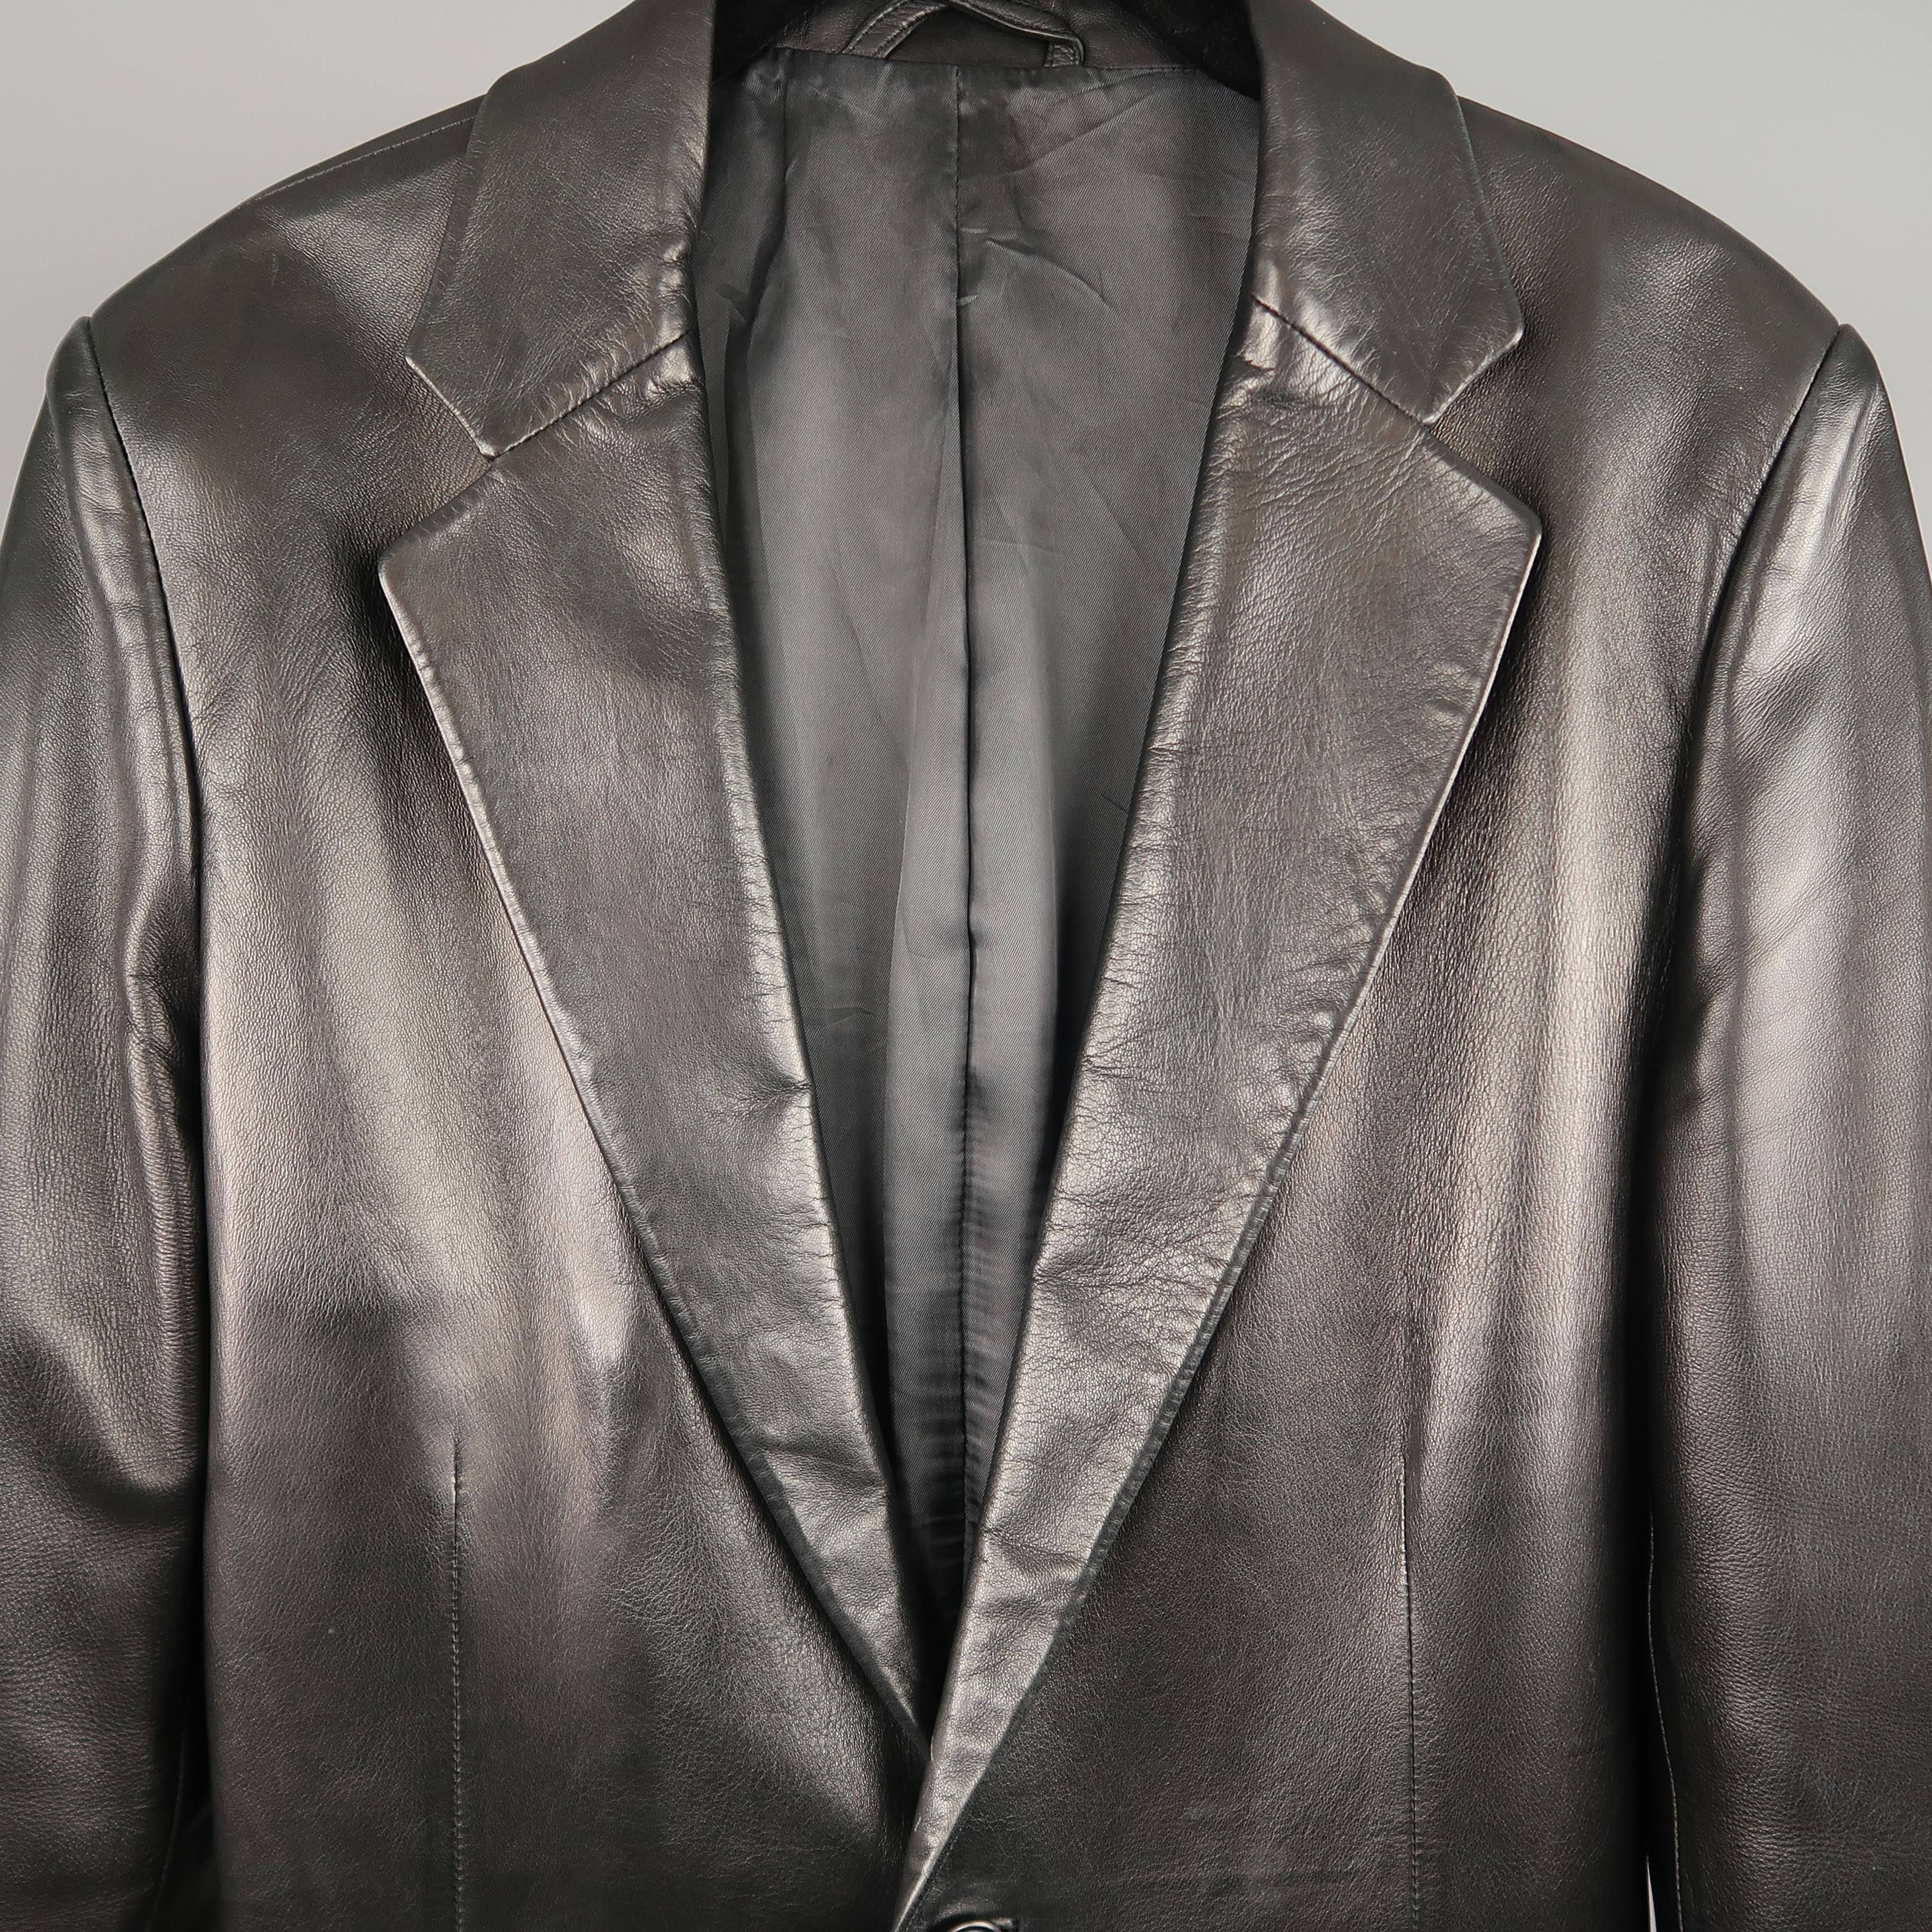 GUCCI by TOM FORD Spring Summer 2001 Collection sport coat jacket comes in smooth black leather with a single breasted two button front, notch lapel, and functional button cuffs. Made in Italy.
 
Good Pre-Owned Condition.
Marked: IT 48
